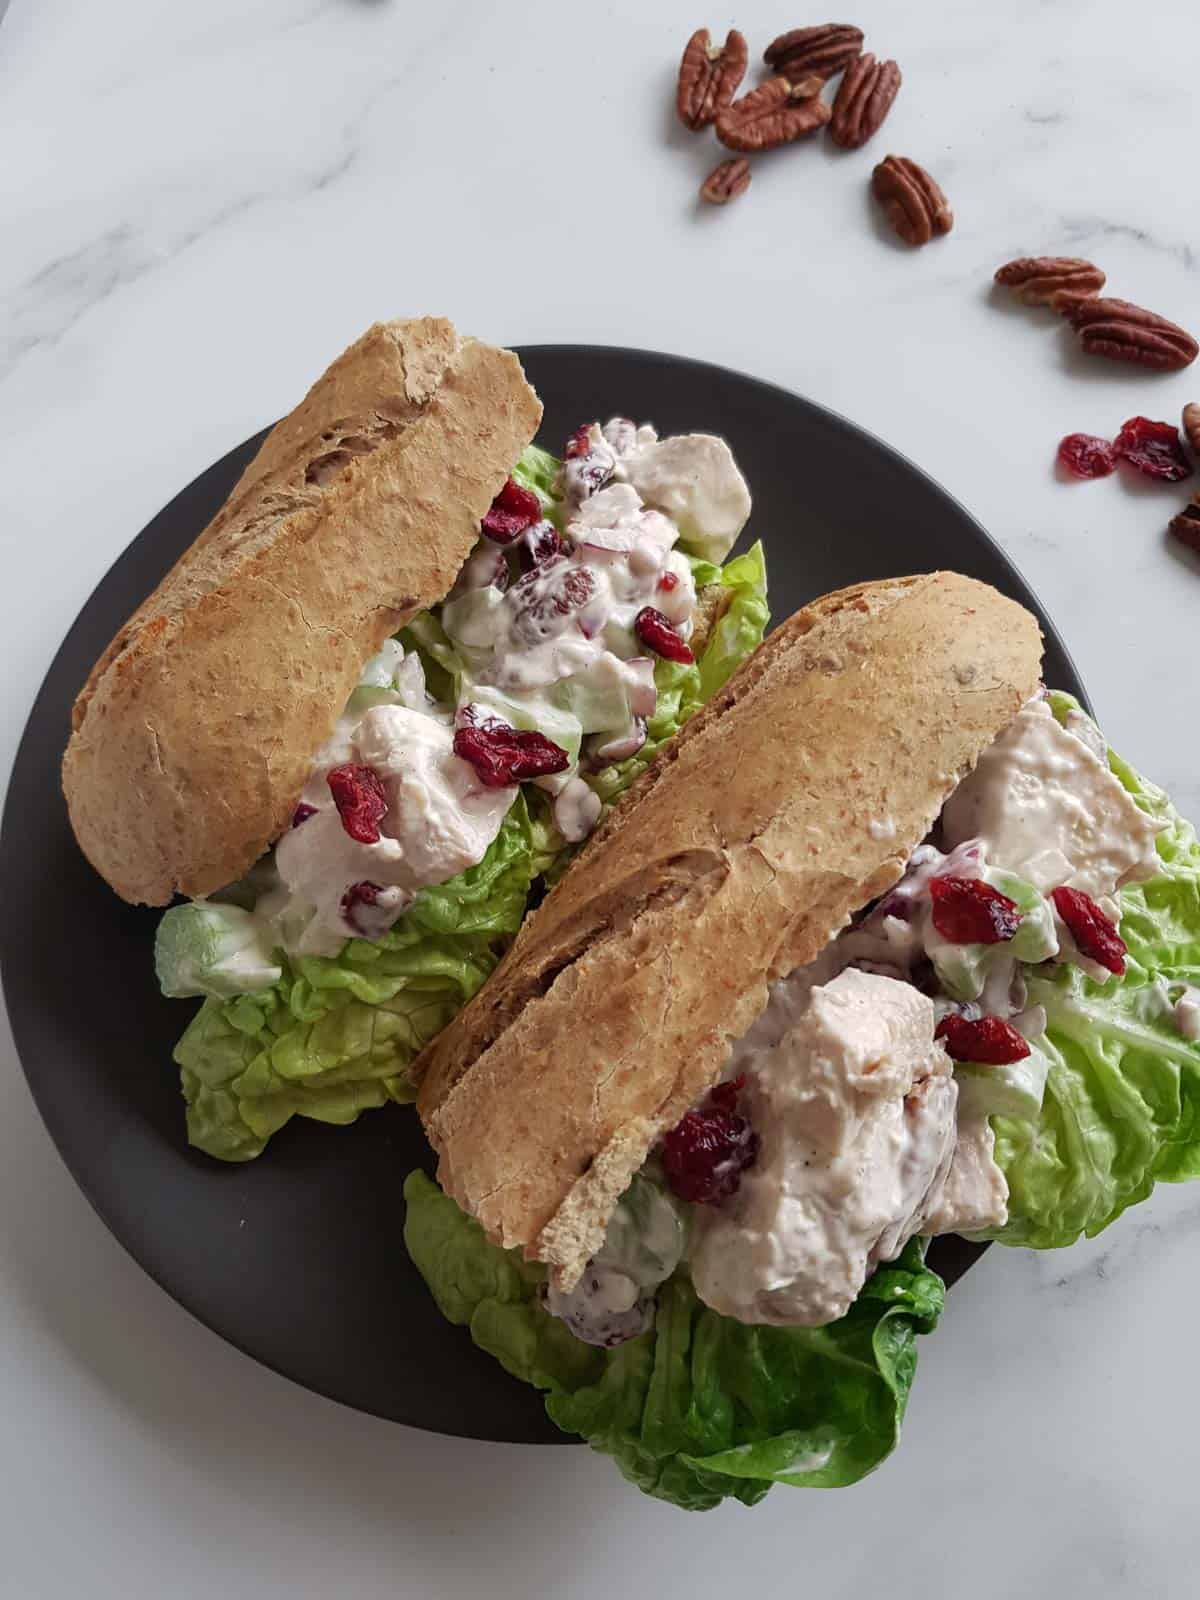 Chicken and cranberry salad in two sandwiches on a plate.